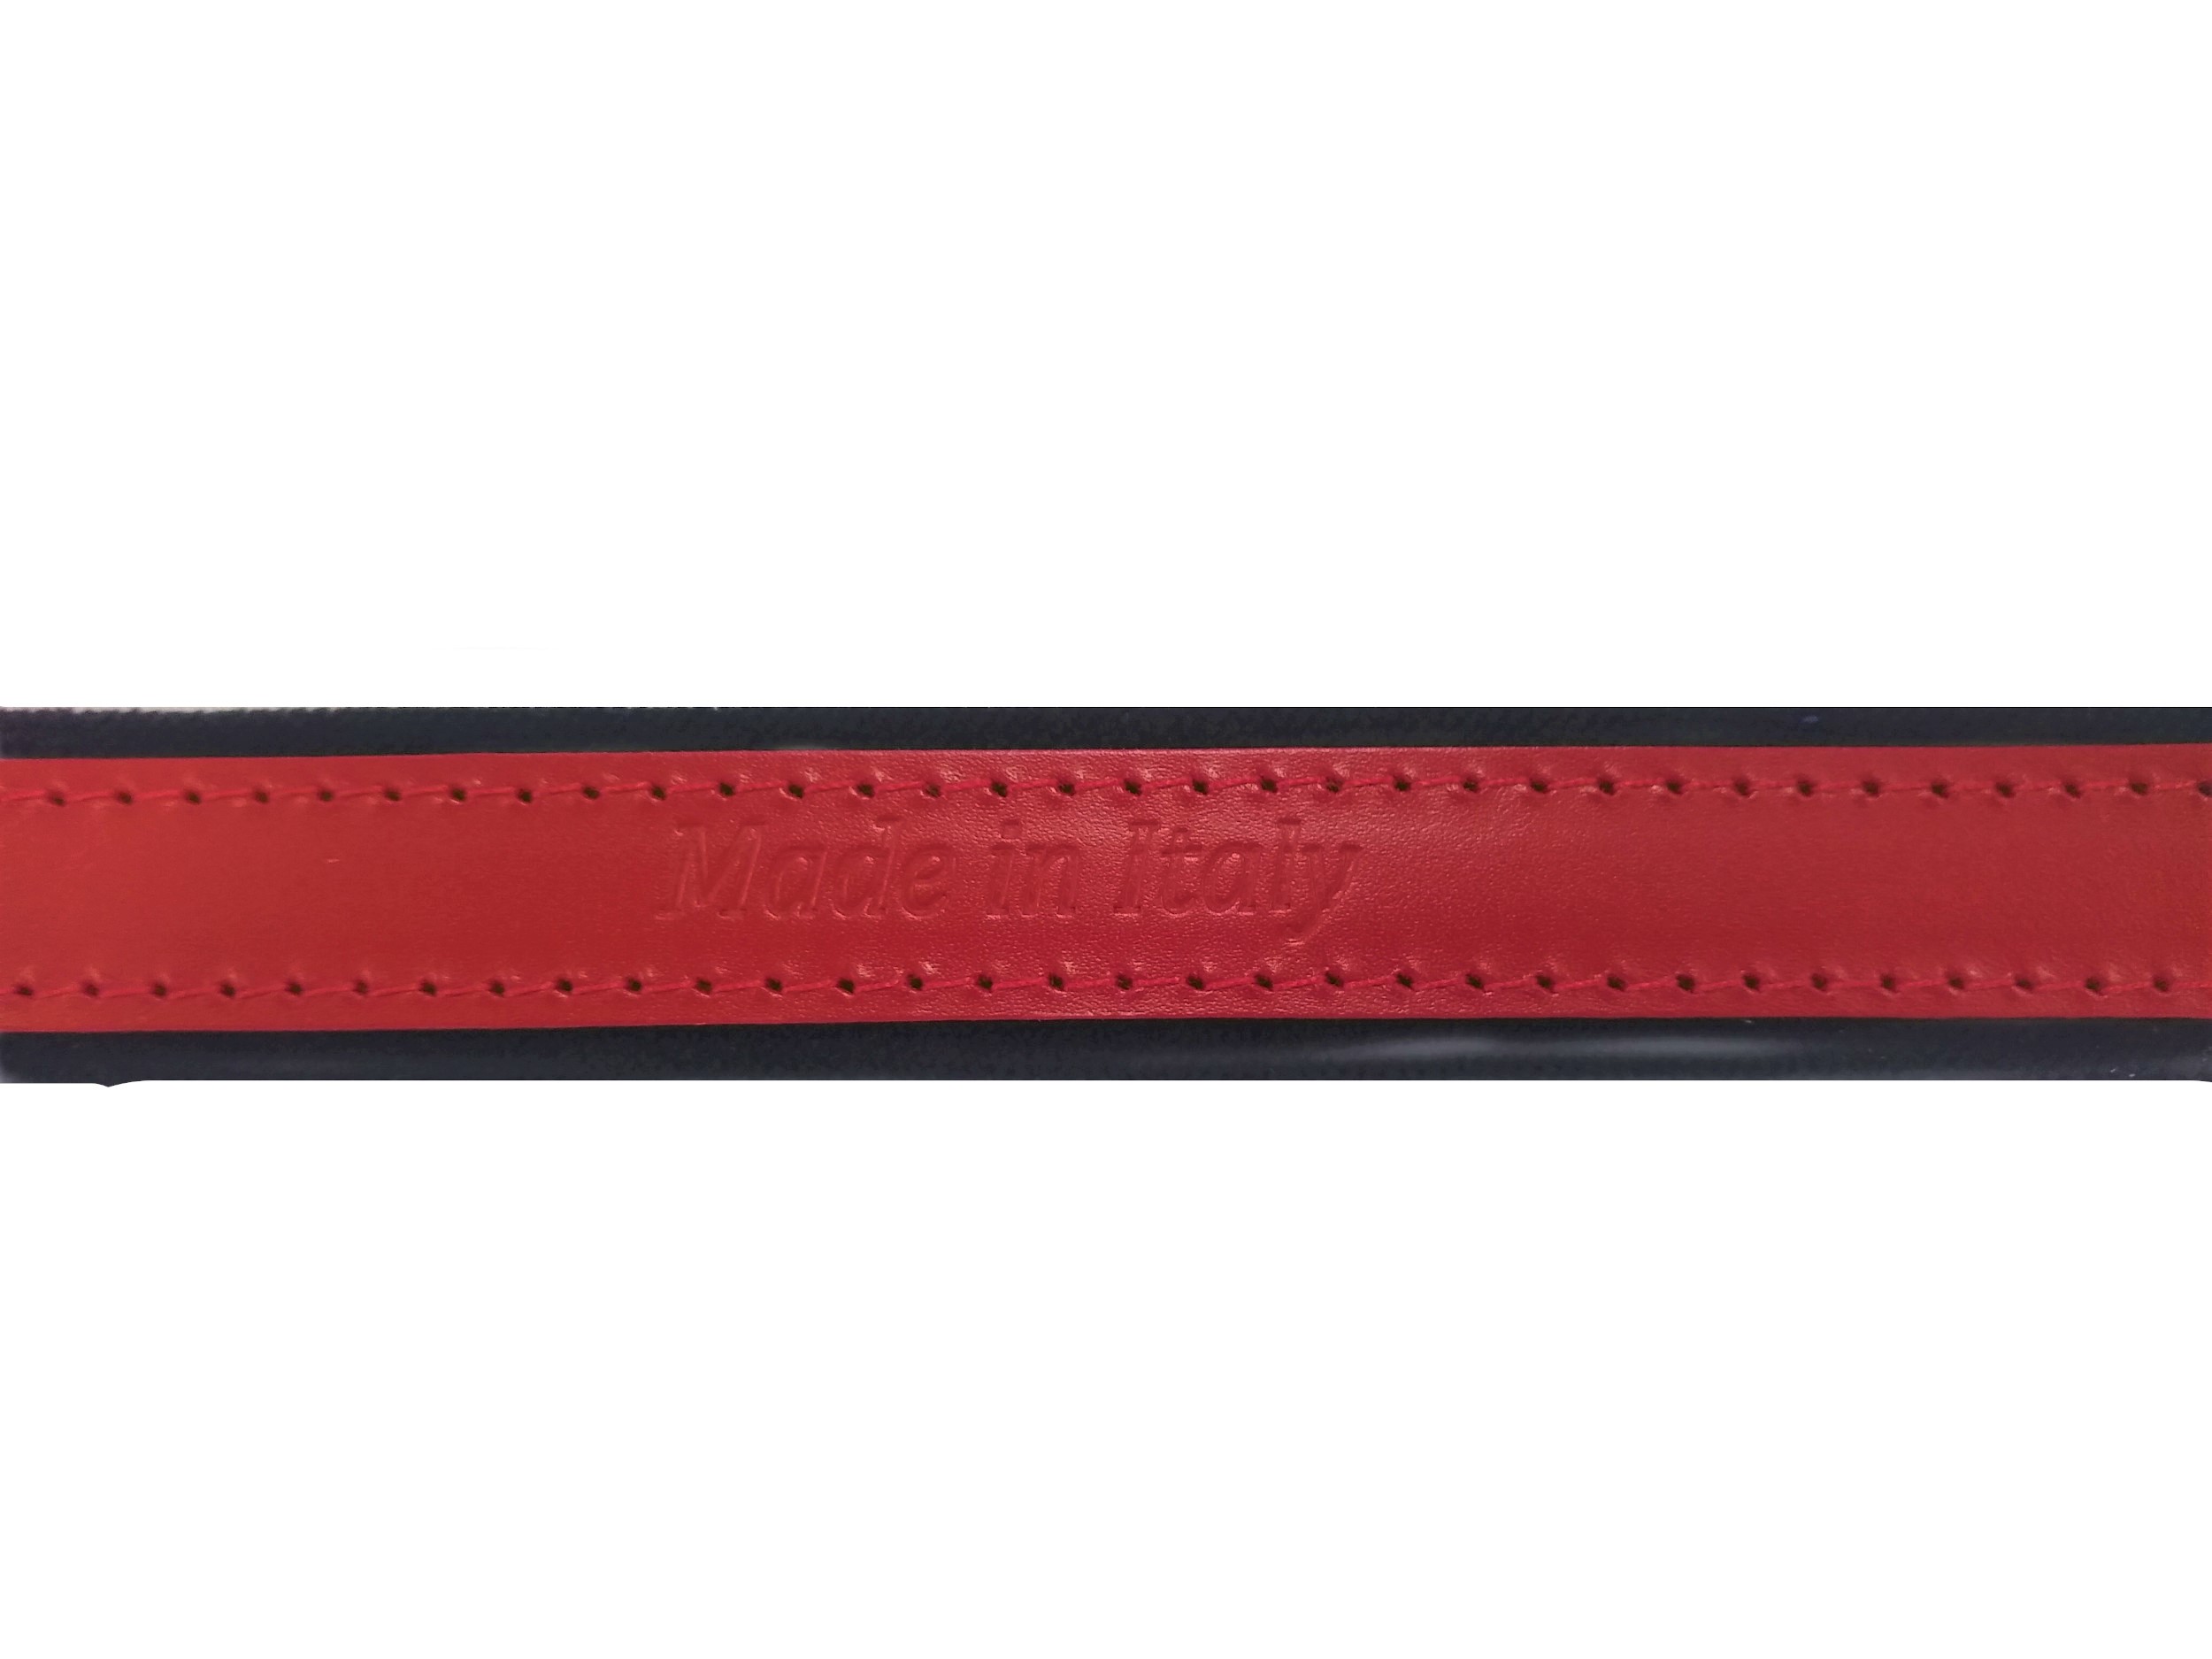 Hohner Extra Large Accordion Leather Straps - Red/Black